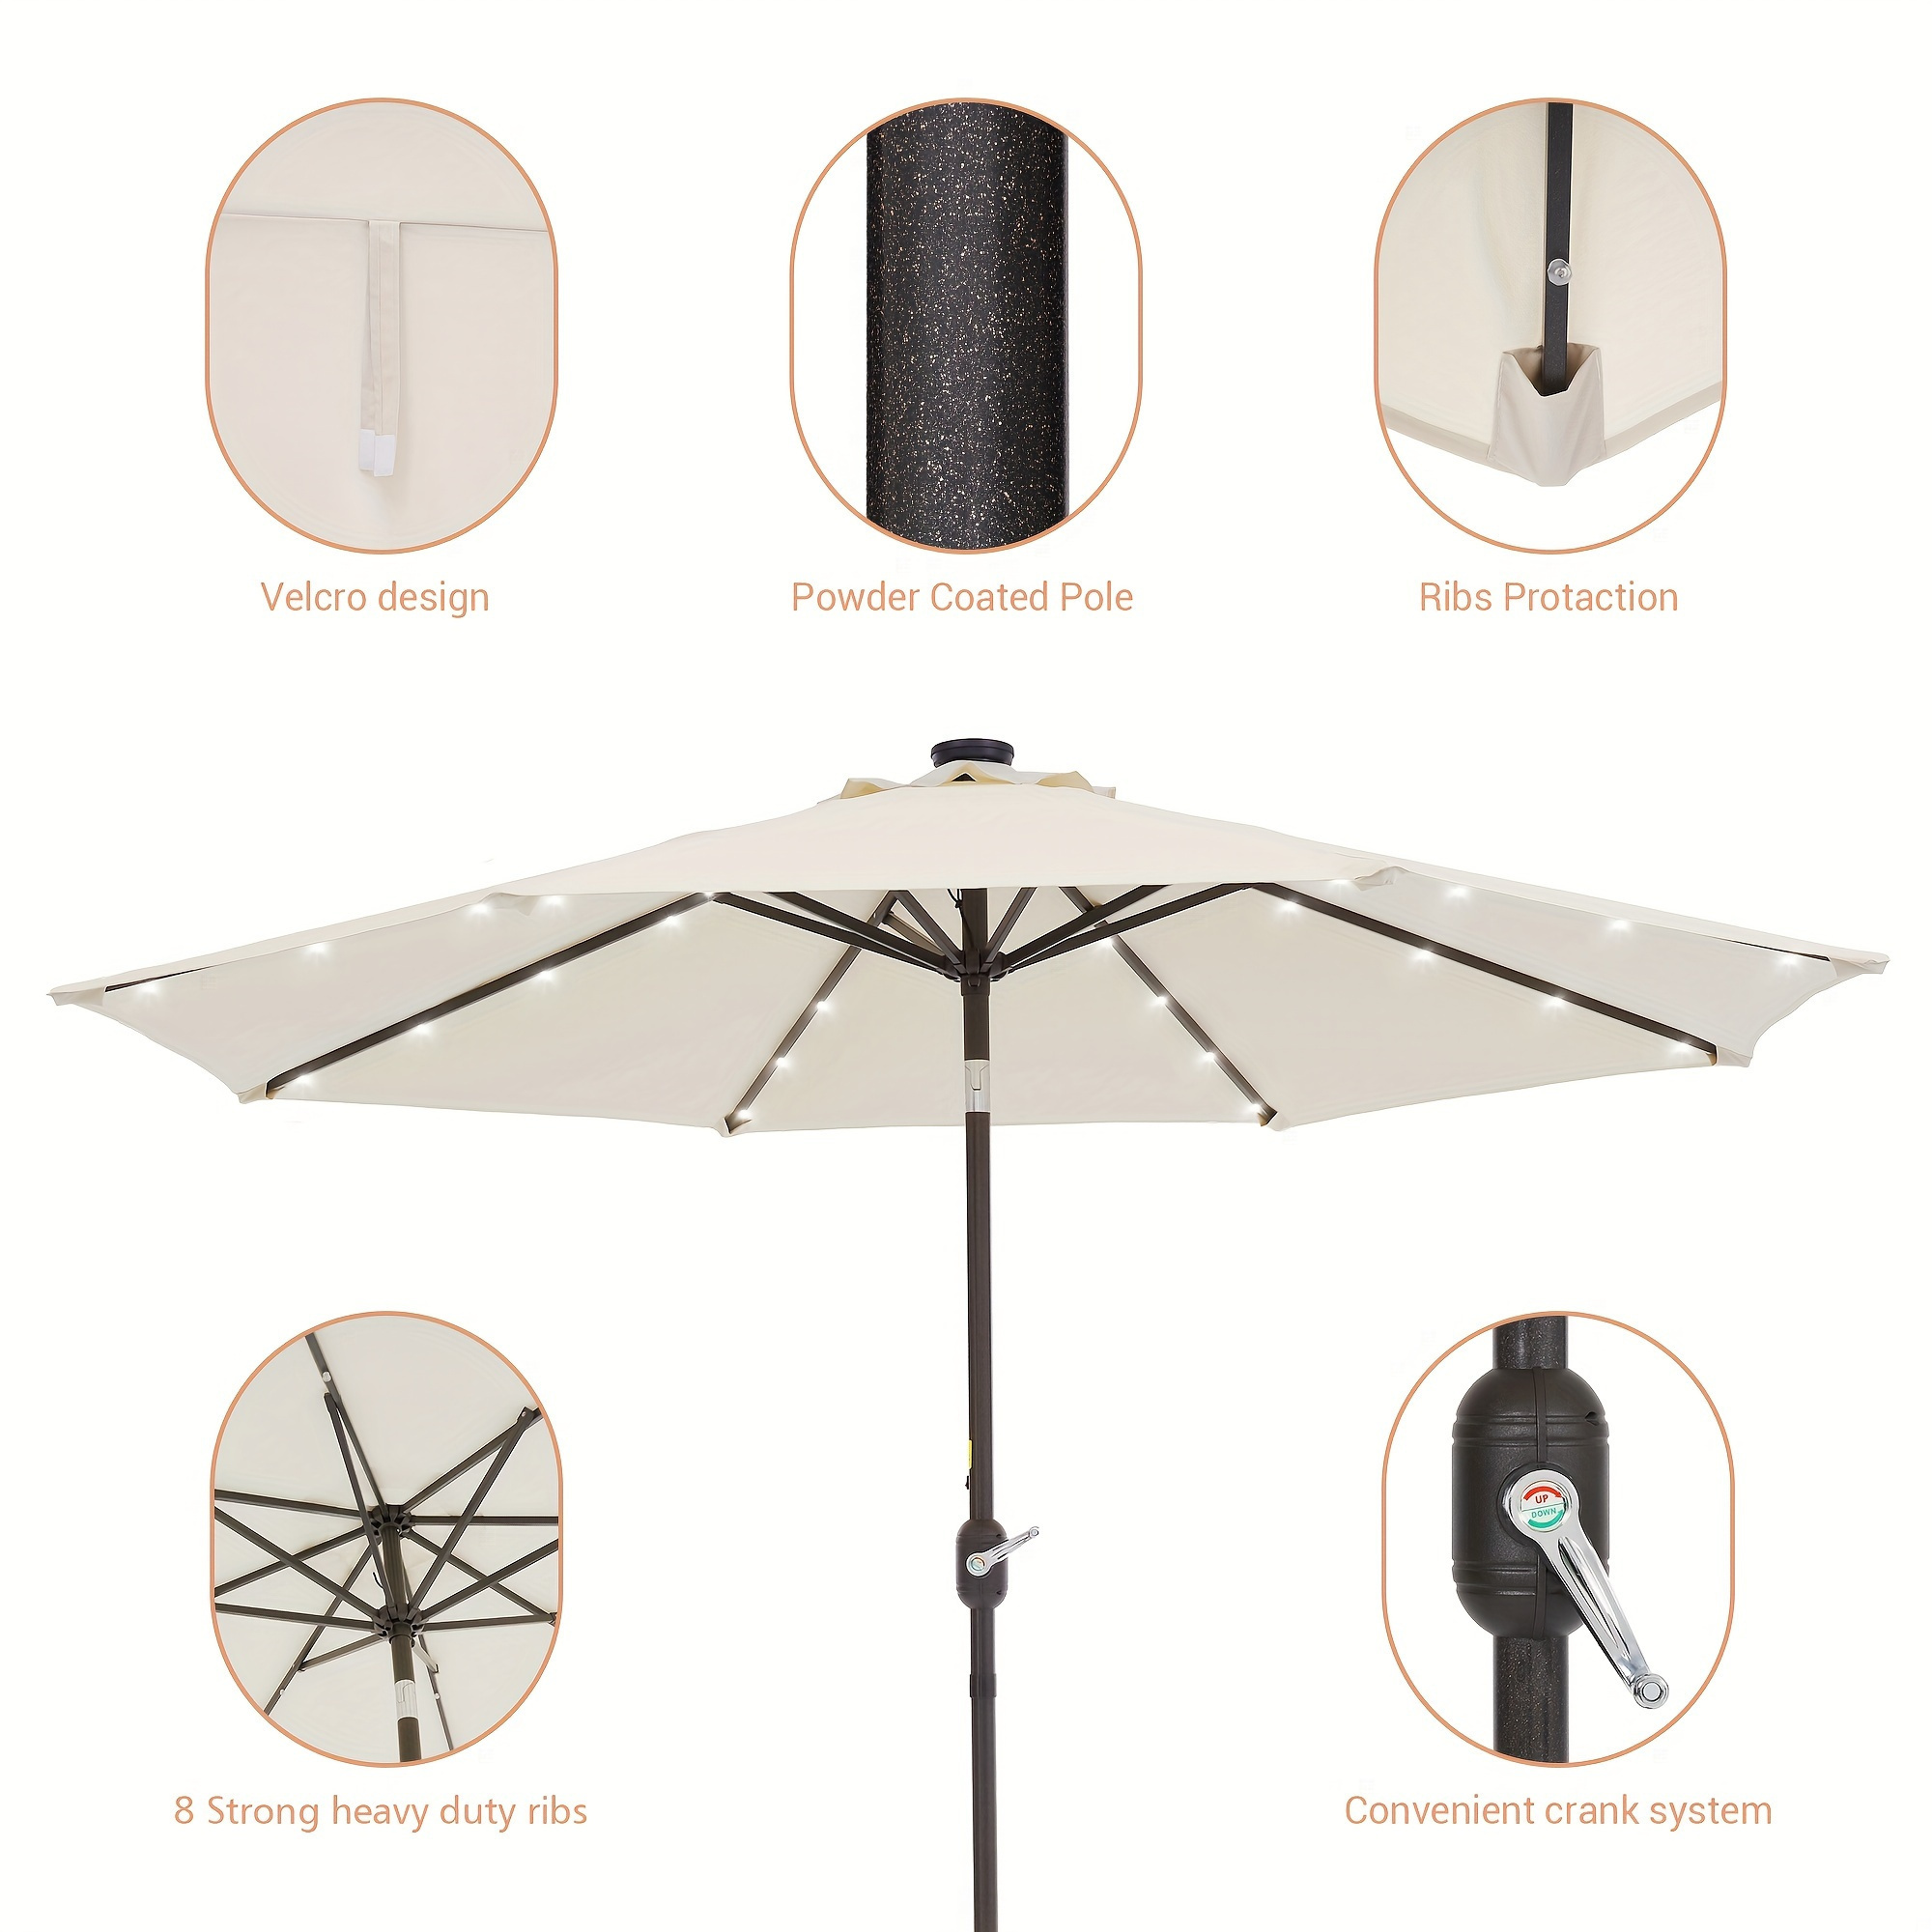 

9ft Led Patio Market Umbrella Outdoor Weather-resistant Frame Table Umbrella For Poolside, Deck And Yard